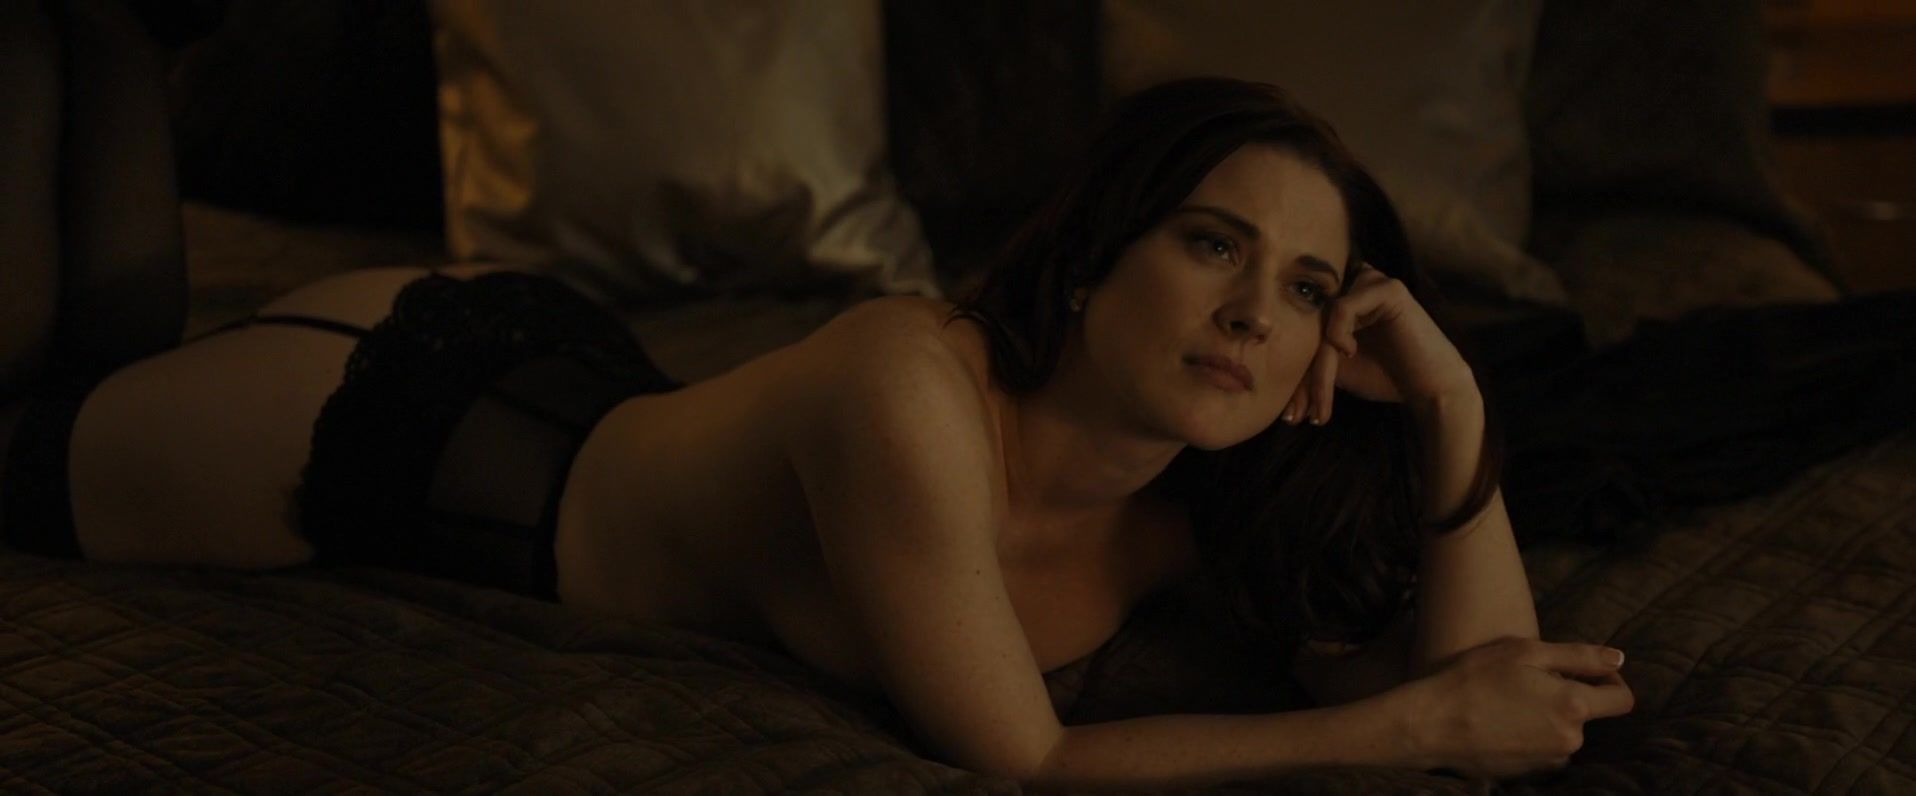 Eating Pussy Hot sexy Alexandra Breckenridge from the movie "Zipper" Asian Babes